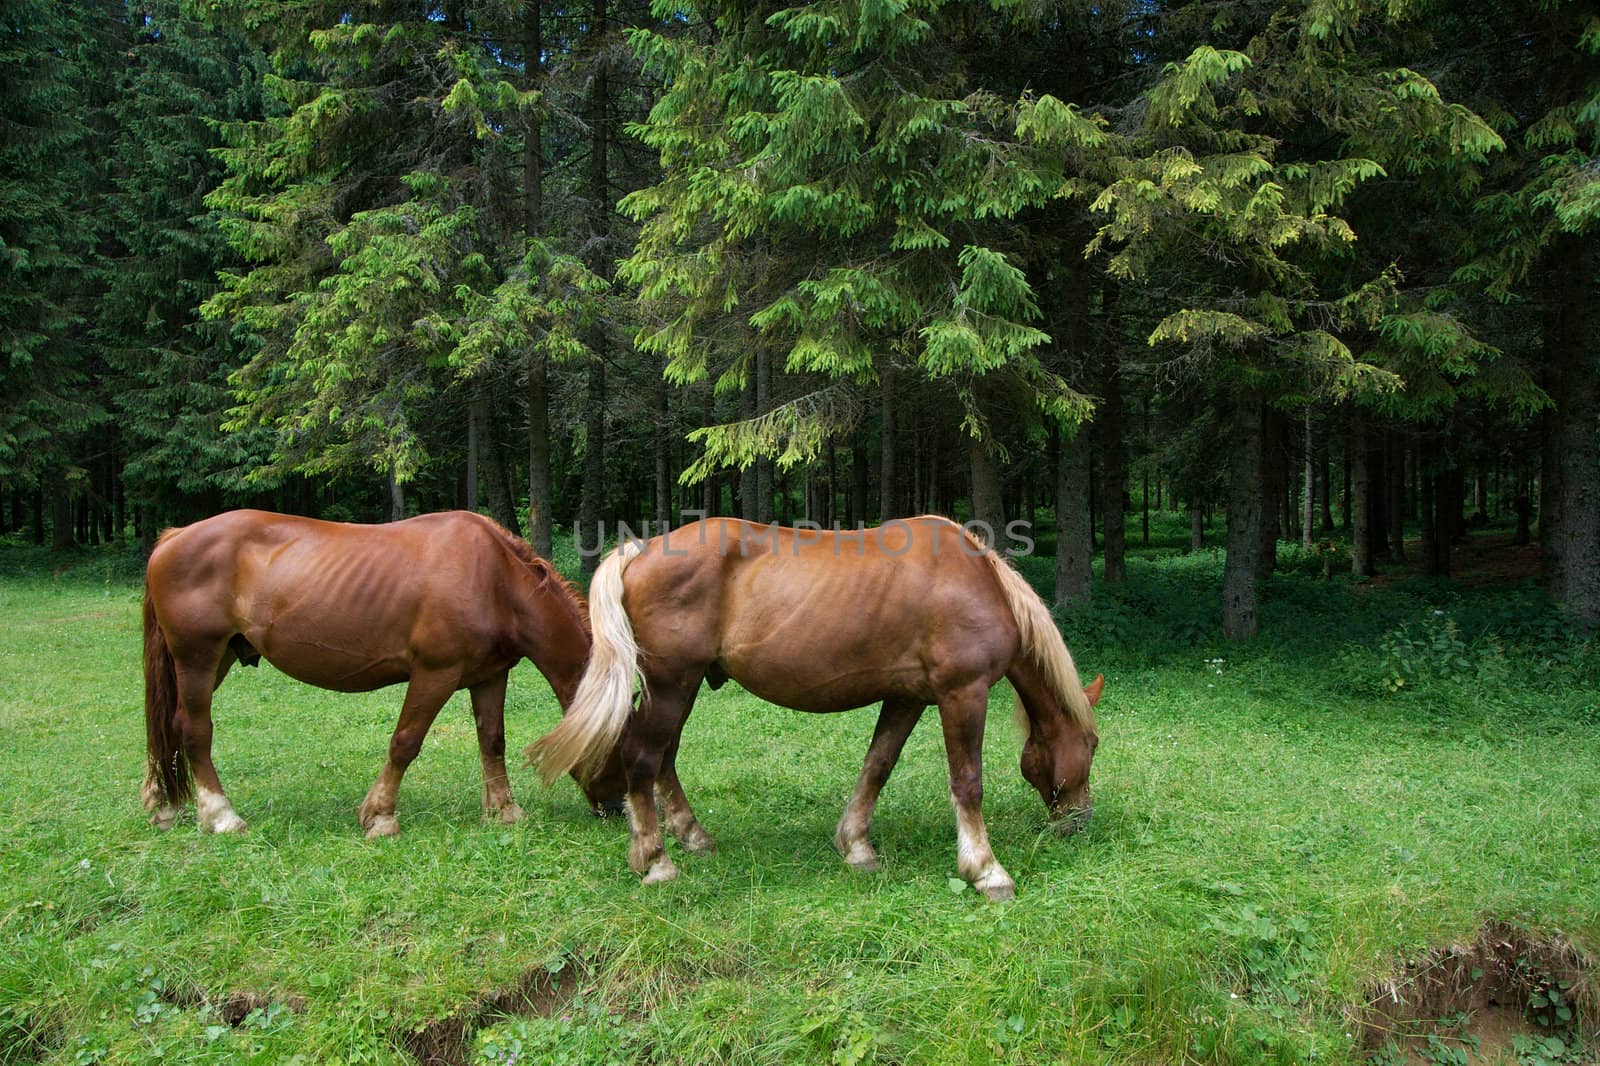 Horses grazing next to the forest